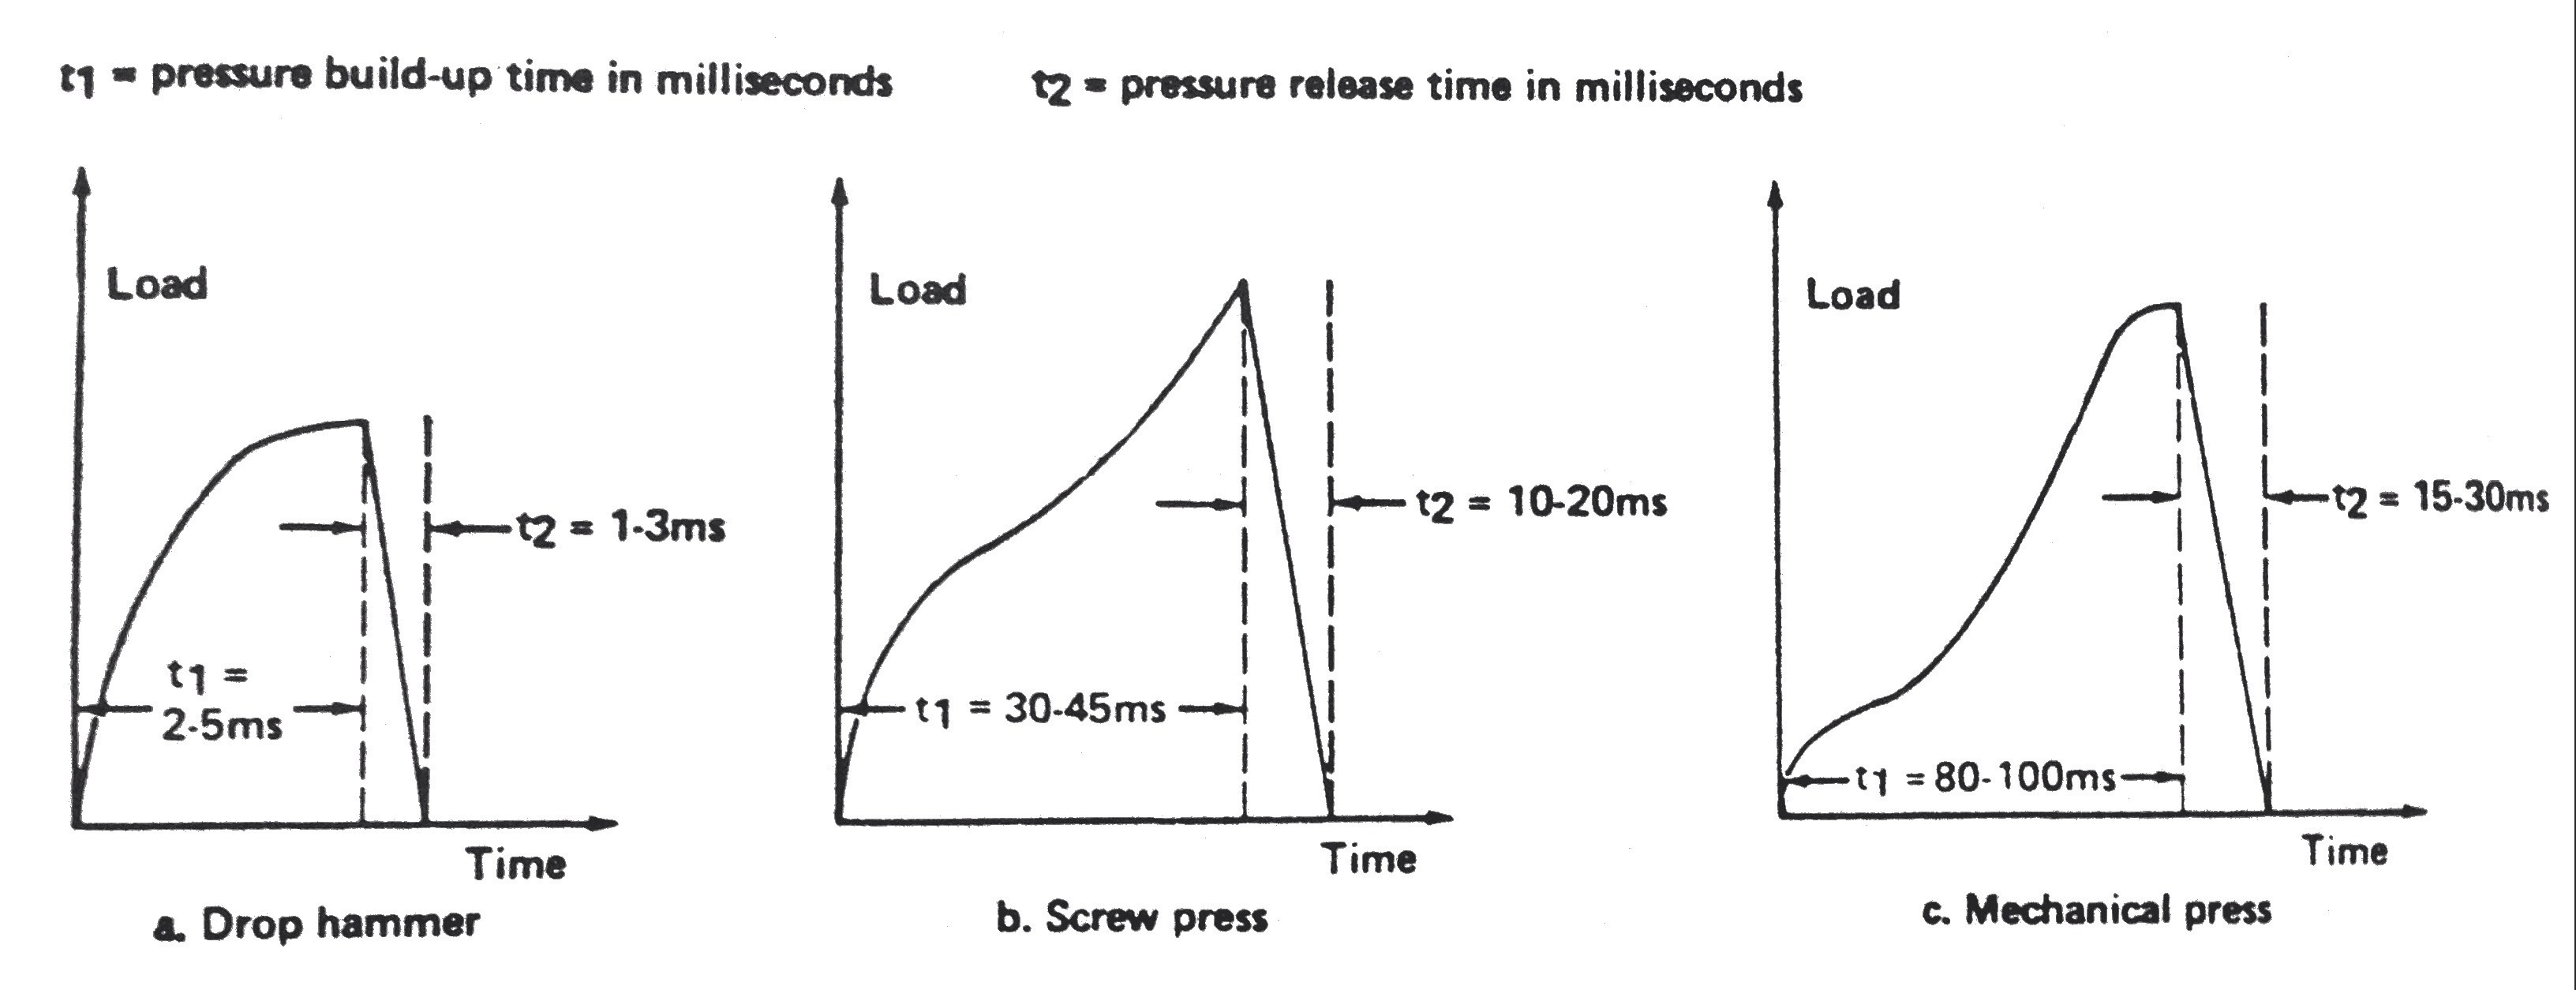 pressure of hammer and press